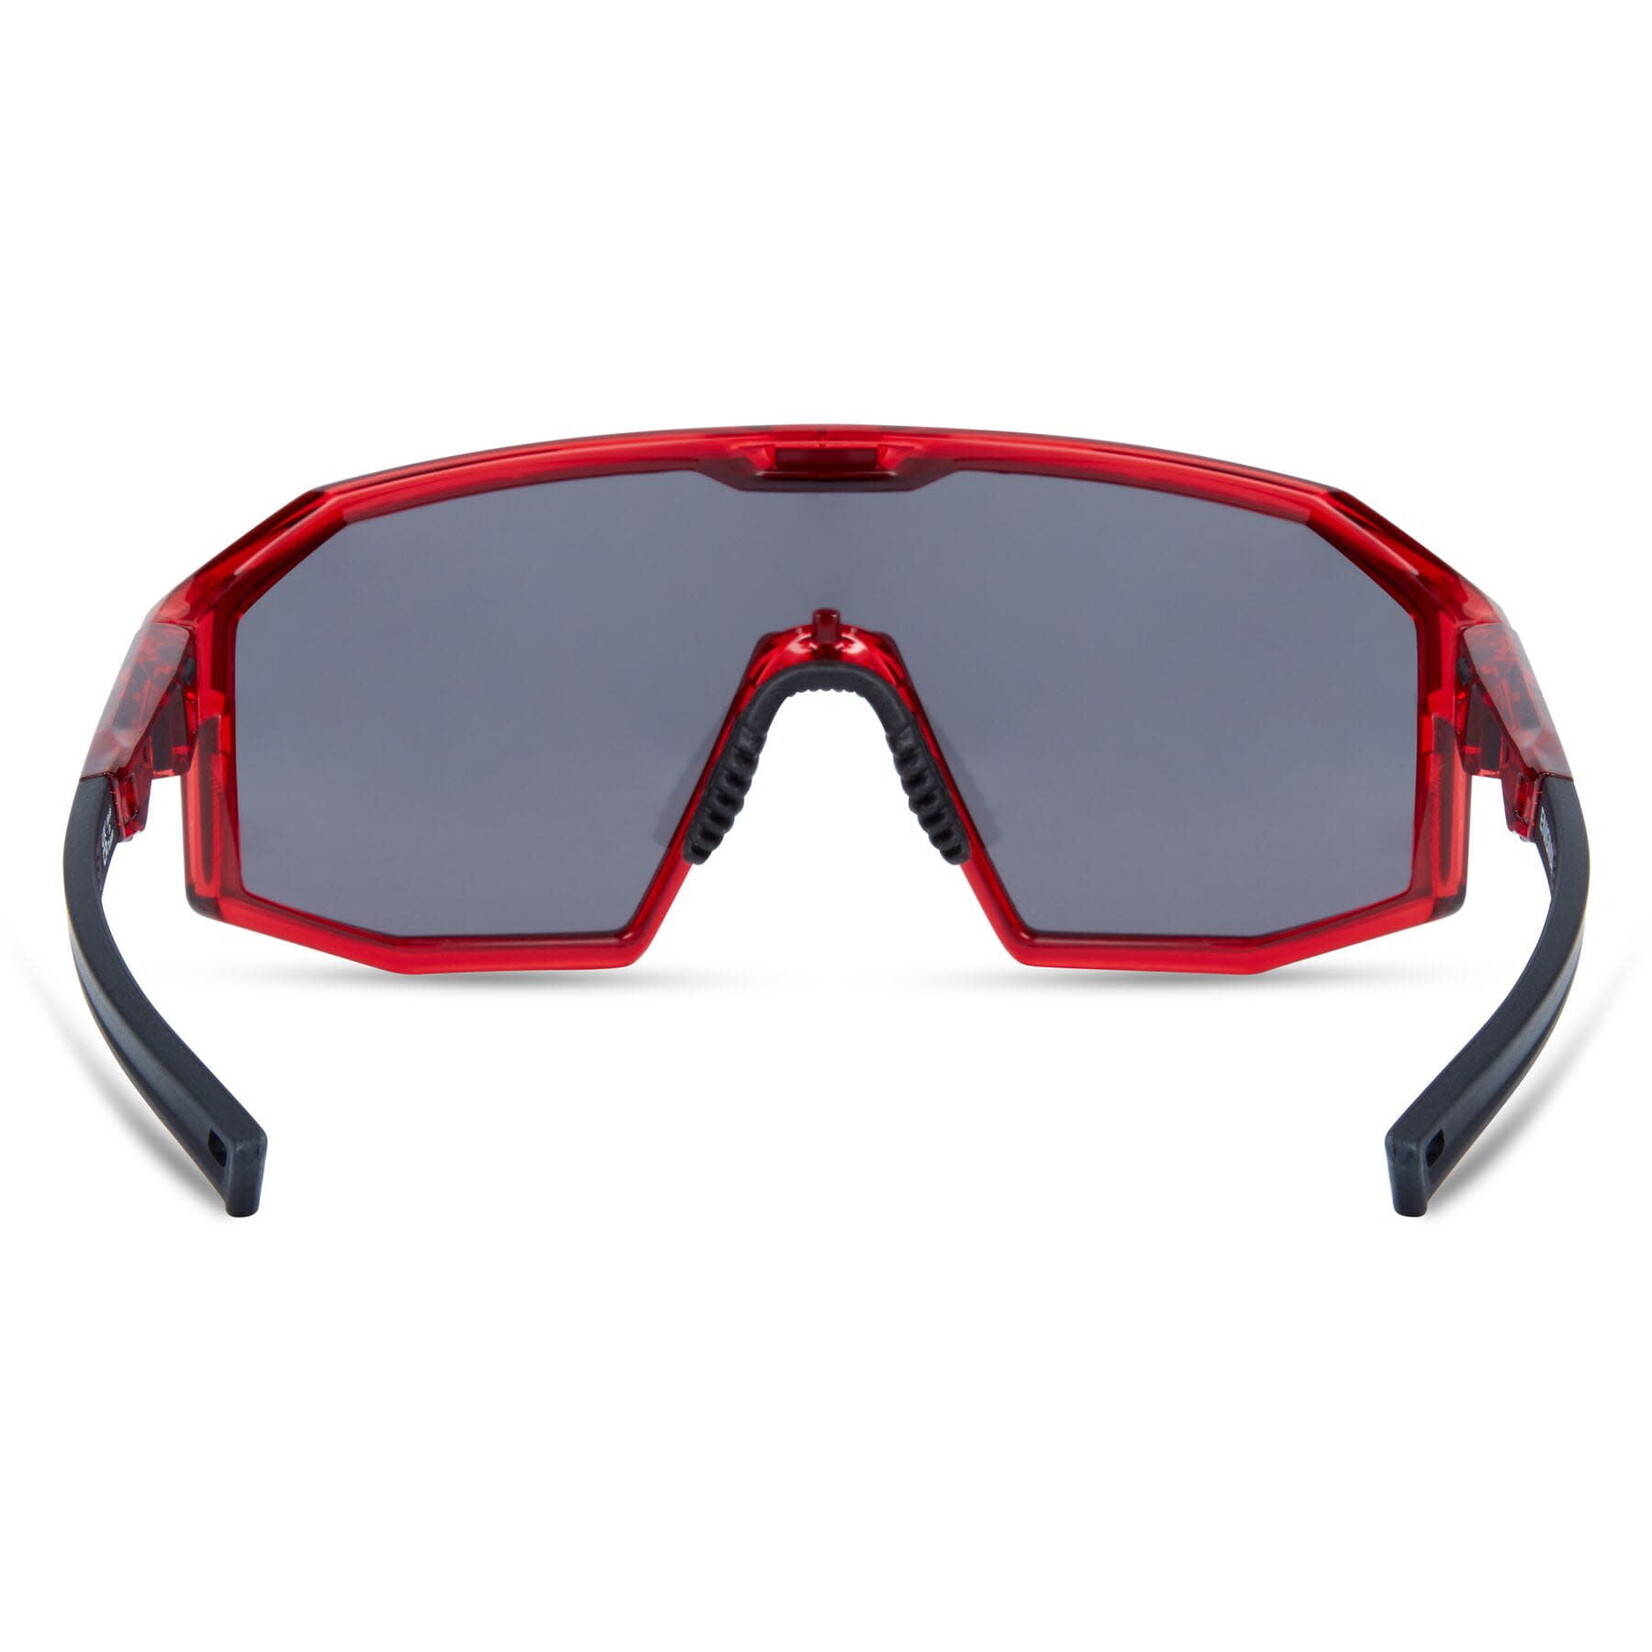 Madison Madison Enigma Sunglasses - 3 pack - crystal red / black mirror / amber and clear lens